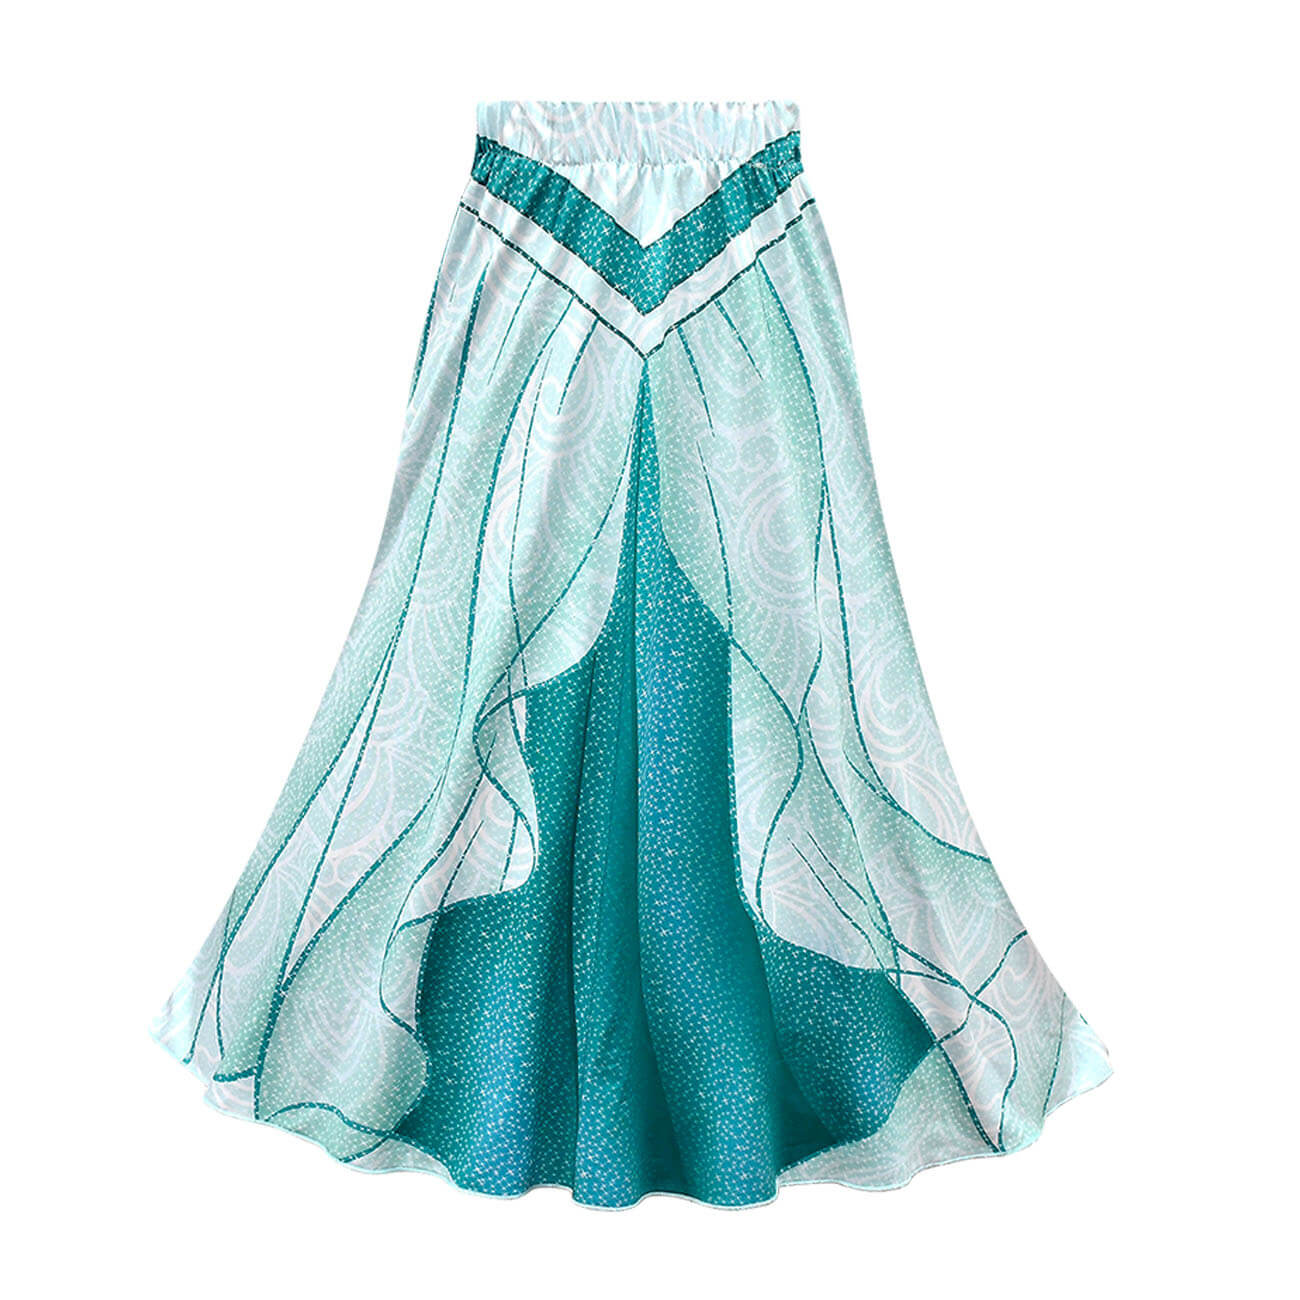 Princess Jasmine Dress Arabian Sequined Cosplay Costumes Kids Party Role Play Dress Up Outfit